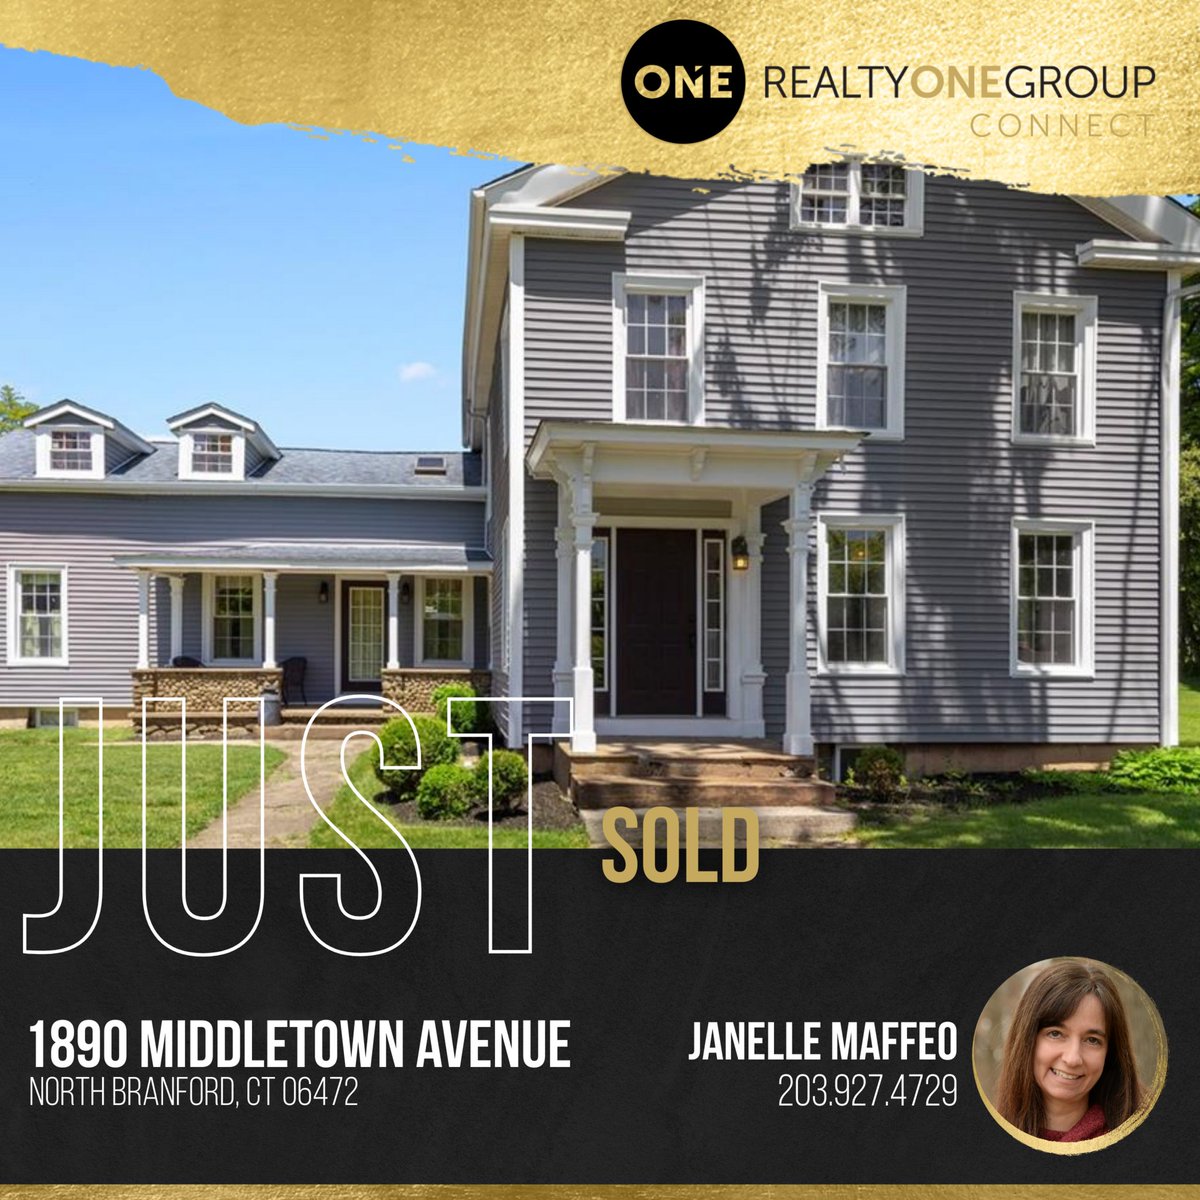 Another ONE Sold by Janelle Maffeo! Congrats to you & your clients! ☝️🙌
#JustSold #Realestate #NorthBranford #rogconnect #one #Openingdoors facebook.com/16025354531814…